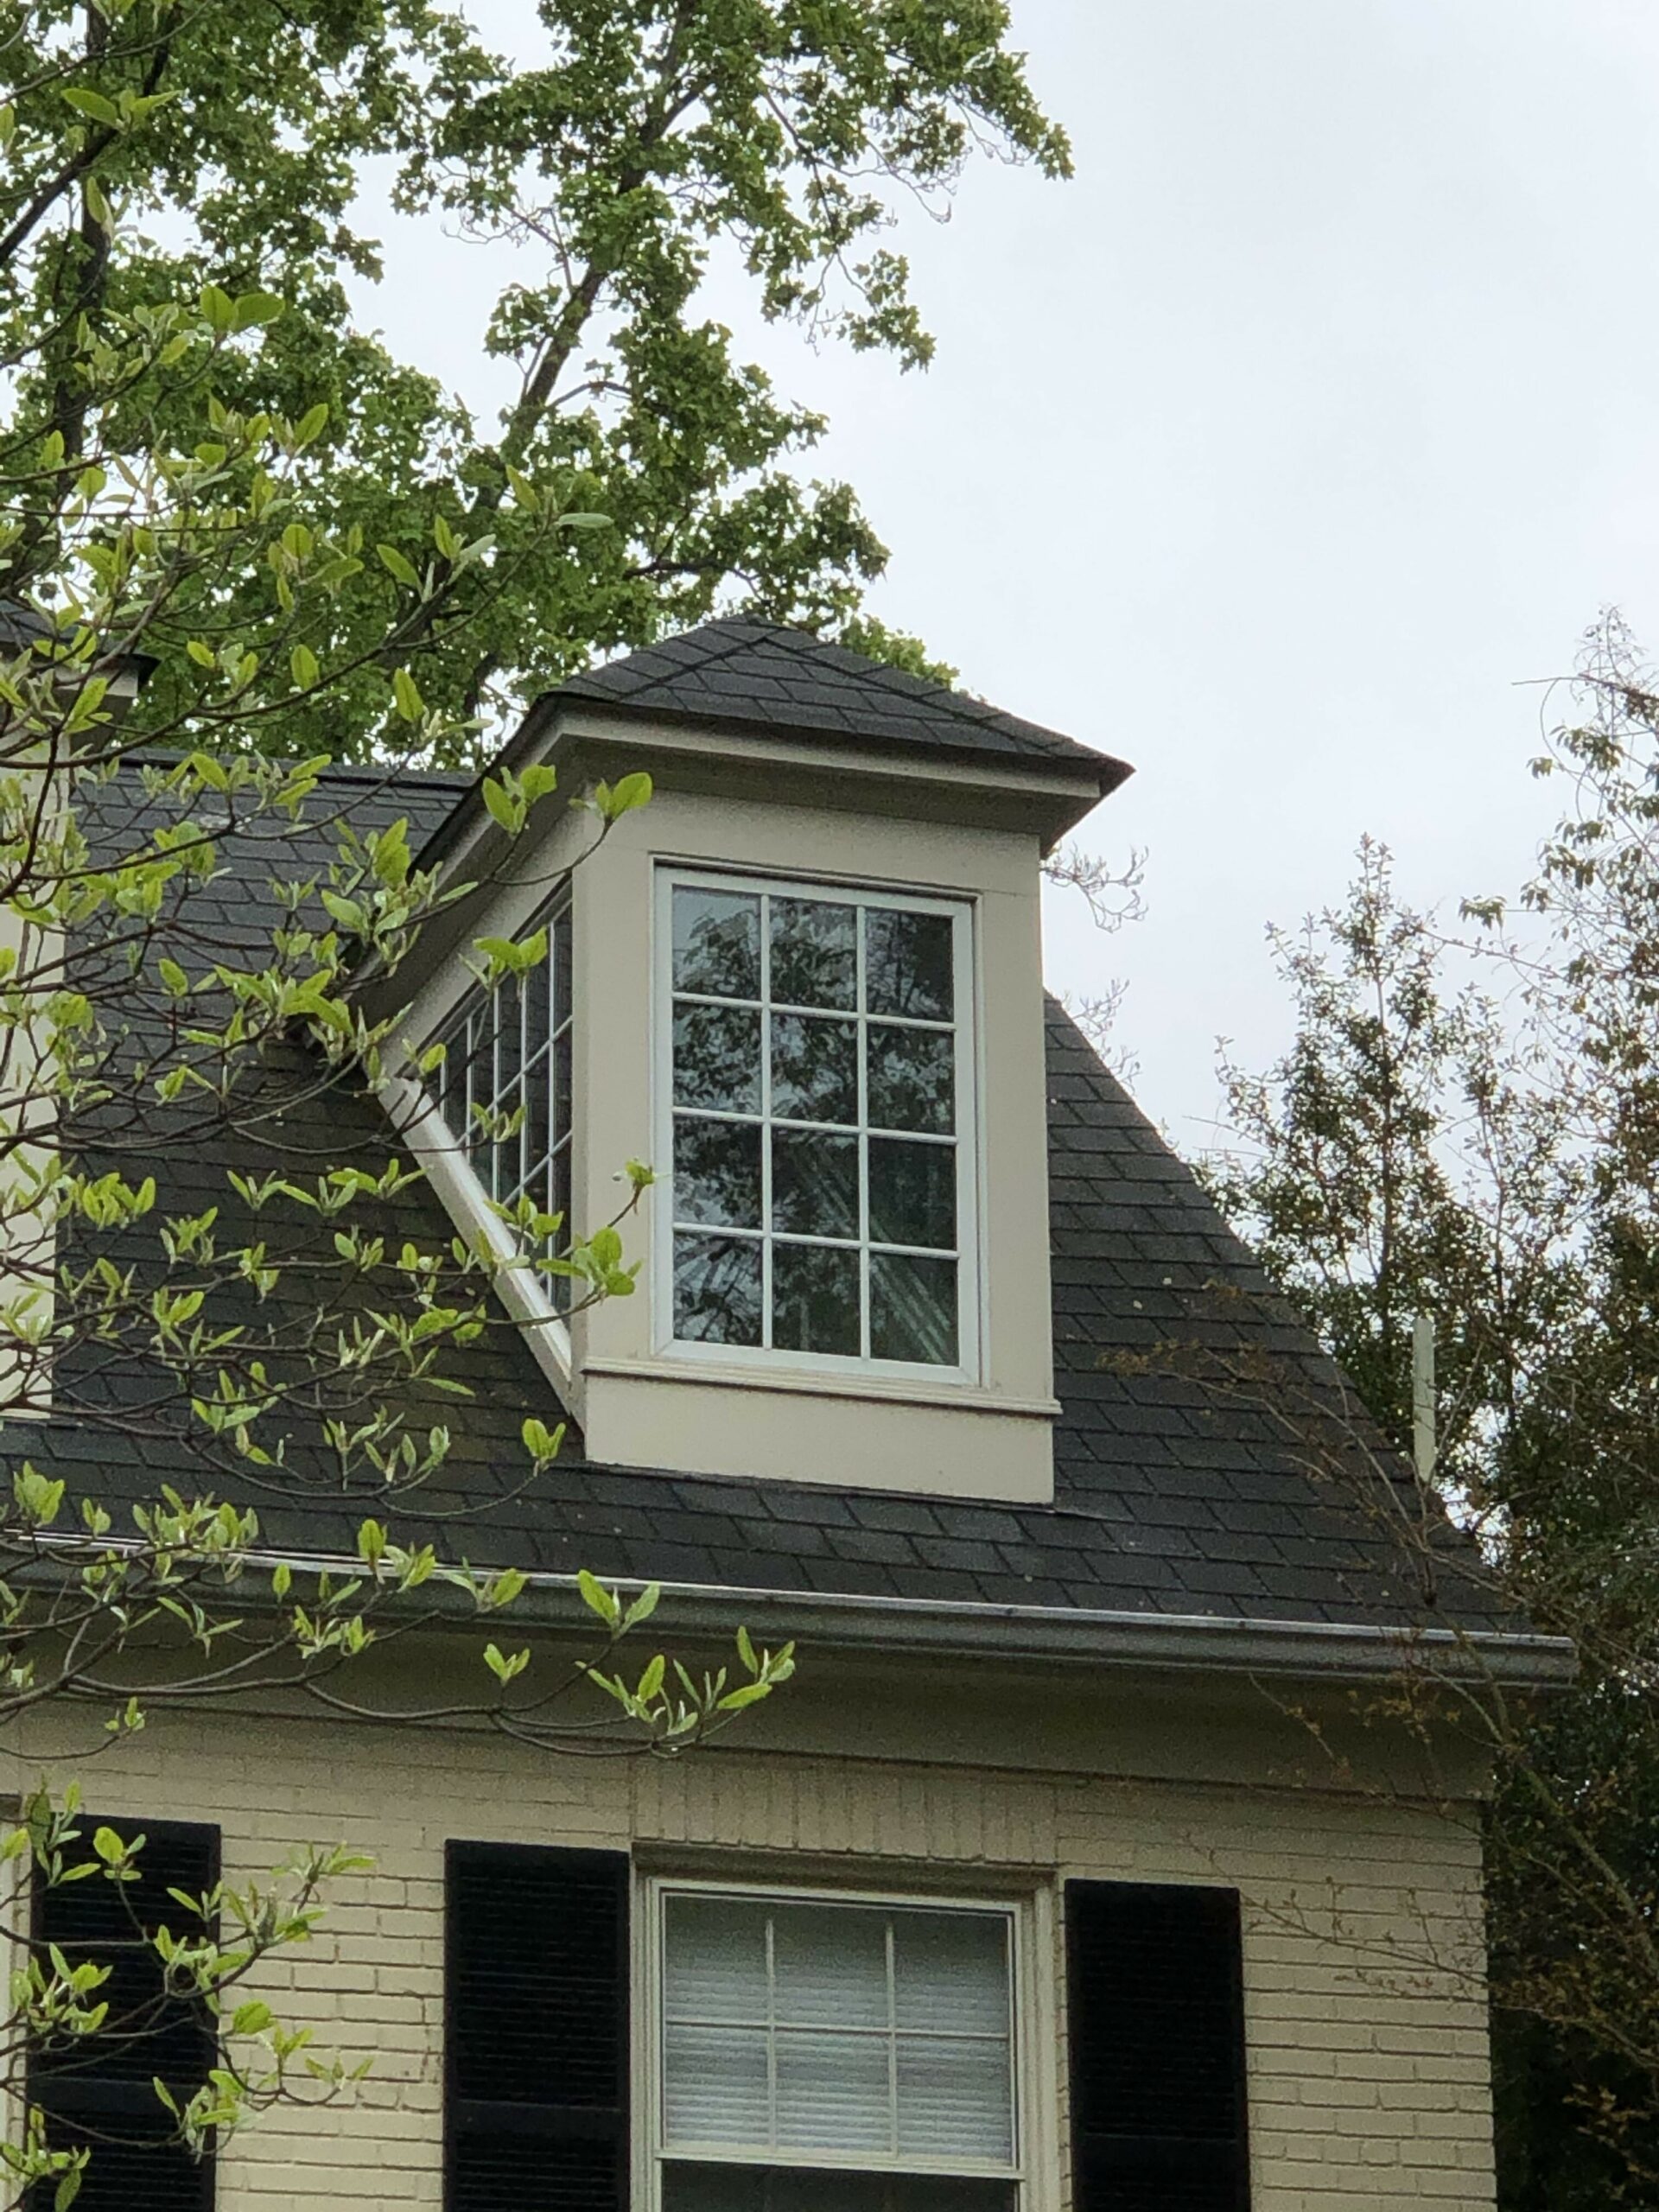 vintage home with dormer window